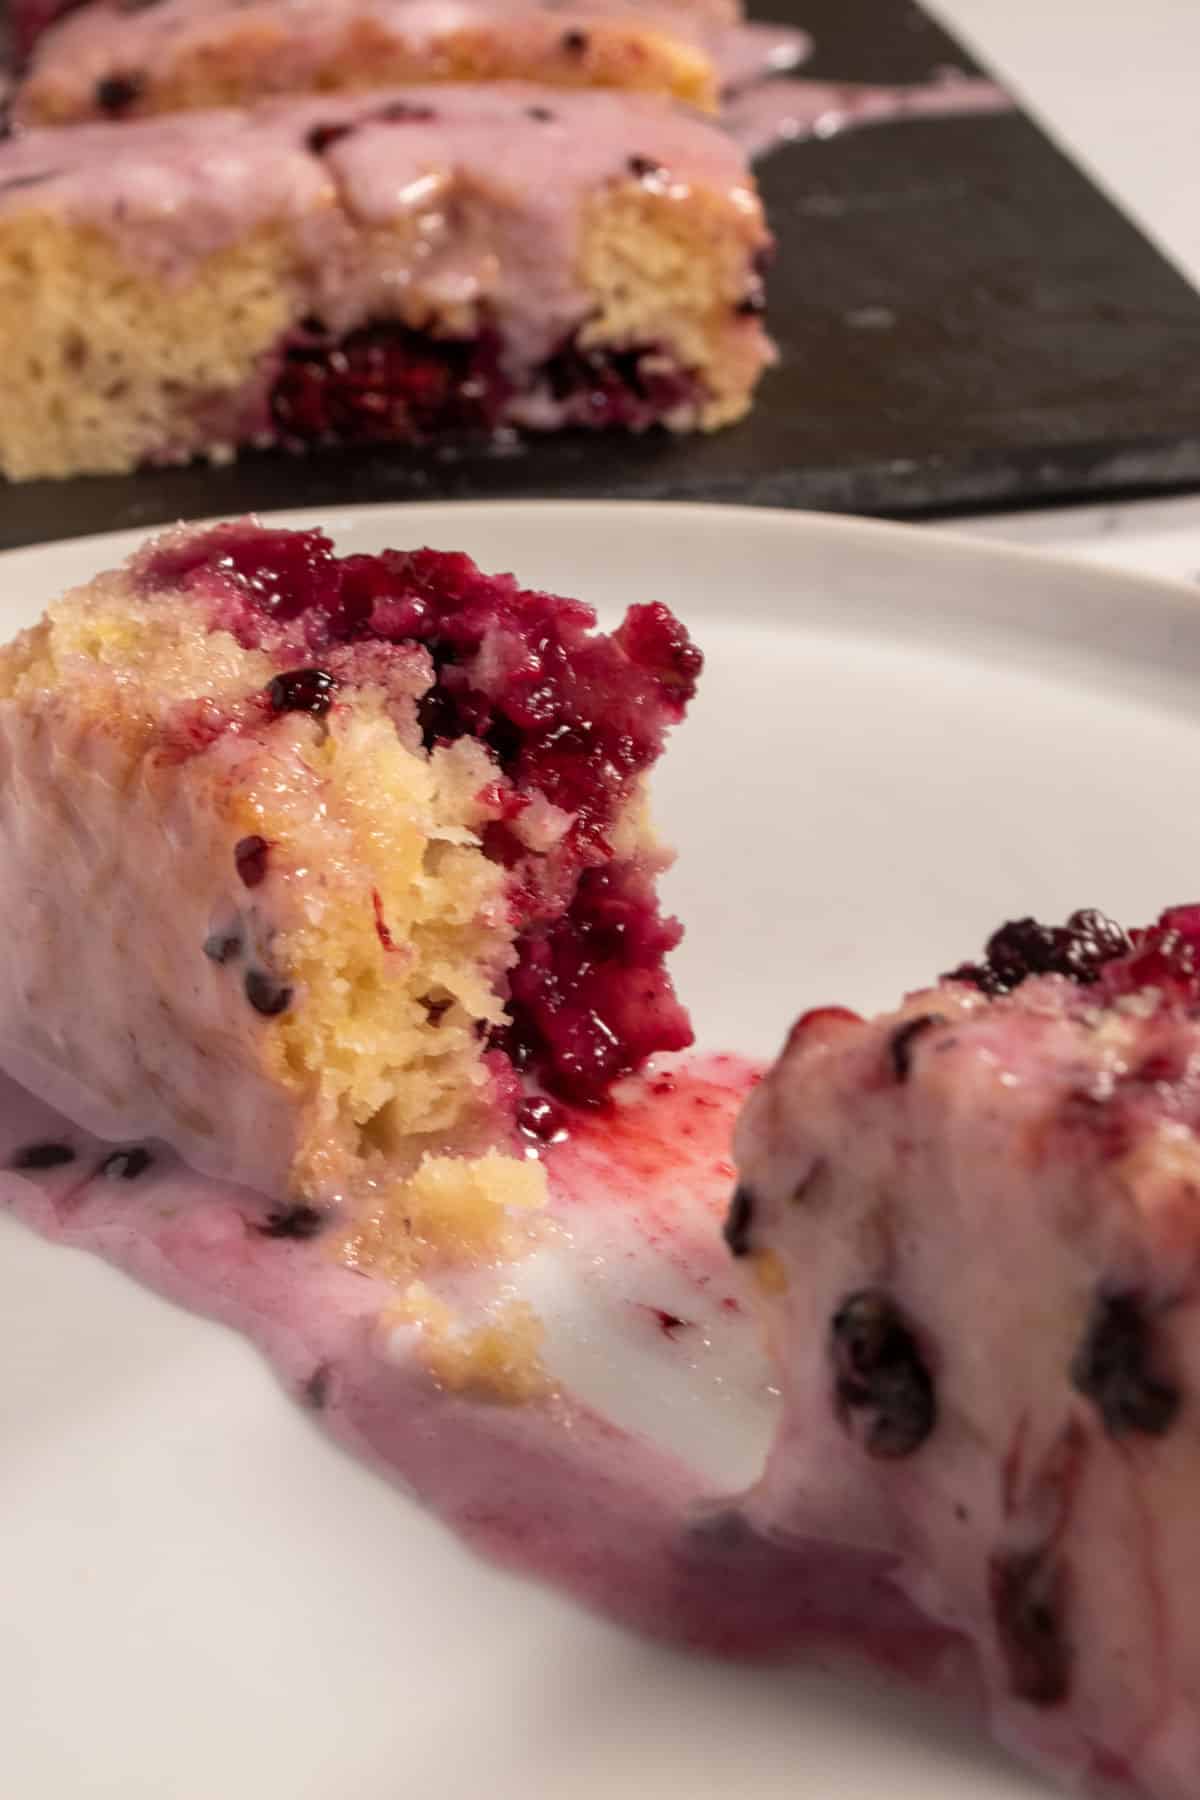 A piece of cake which has been sliced in half revealing lots of blackberries on the inside. It sits on a small, white plate, while the rest of the cake is in the background.